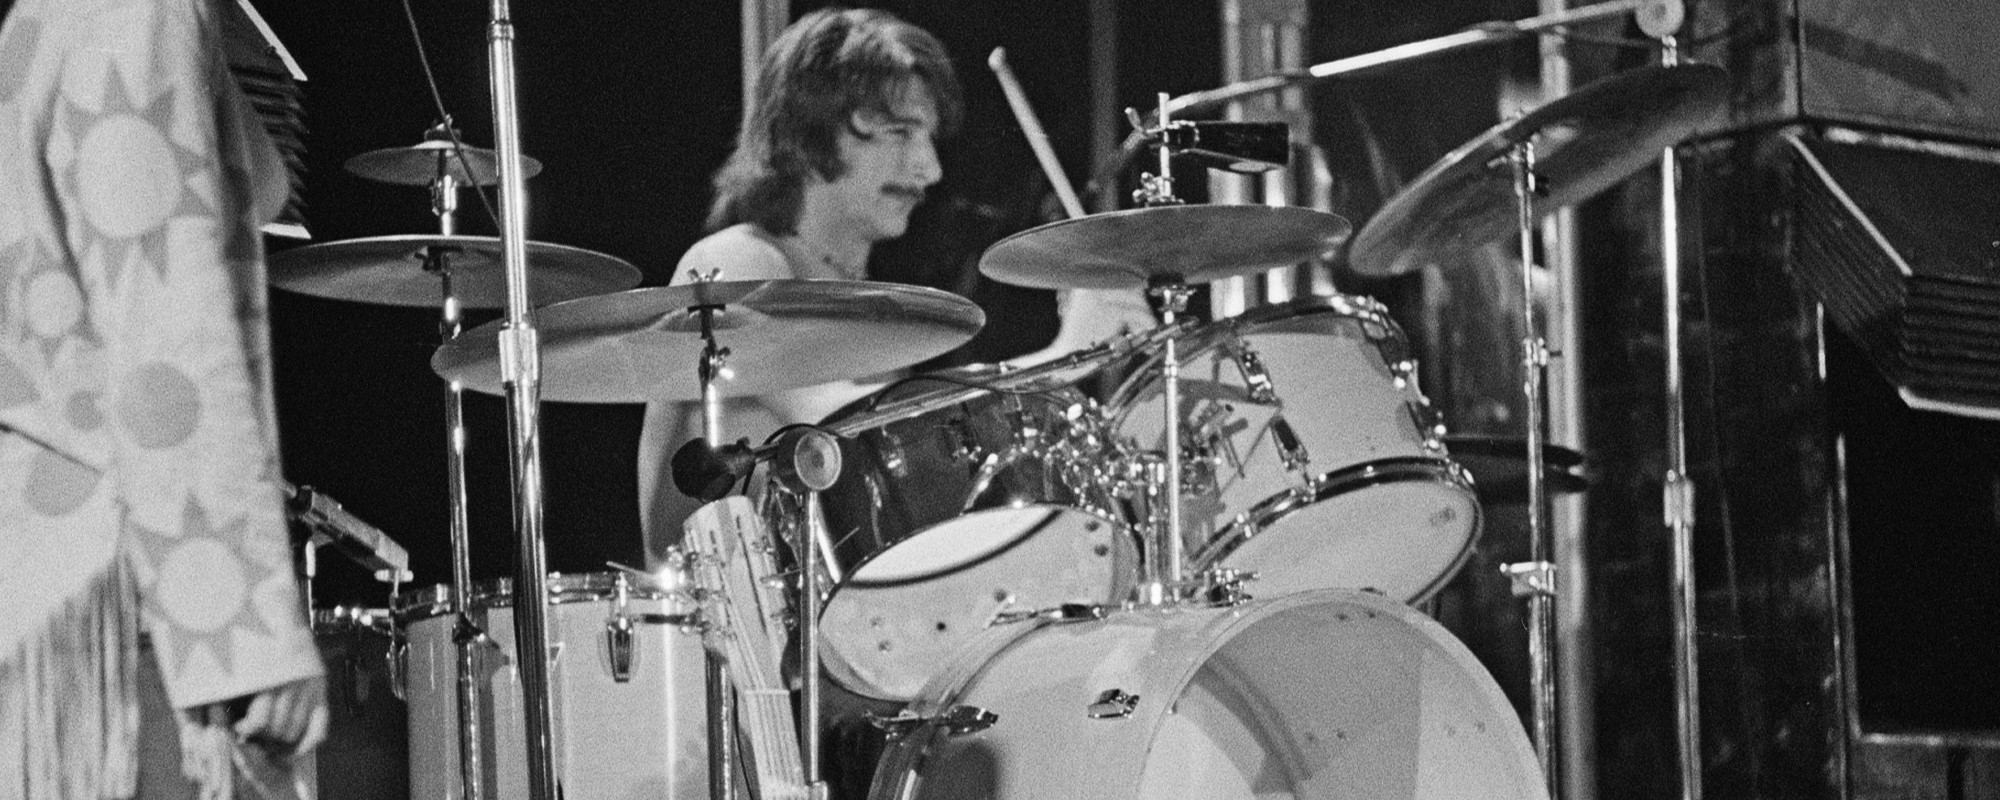 Drummer John Barbata, Who Played with The Turtles, CSNY, Jefferson Starship & Others, Dead at 79